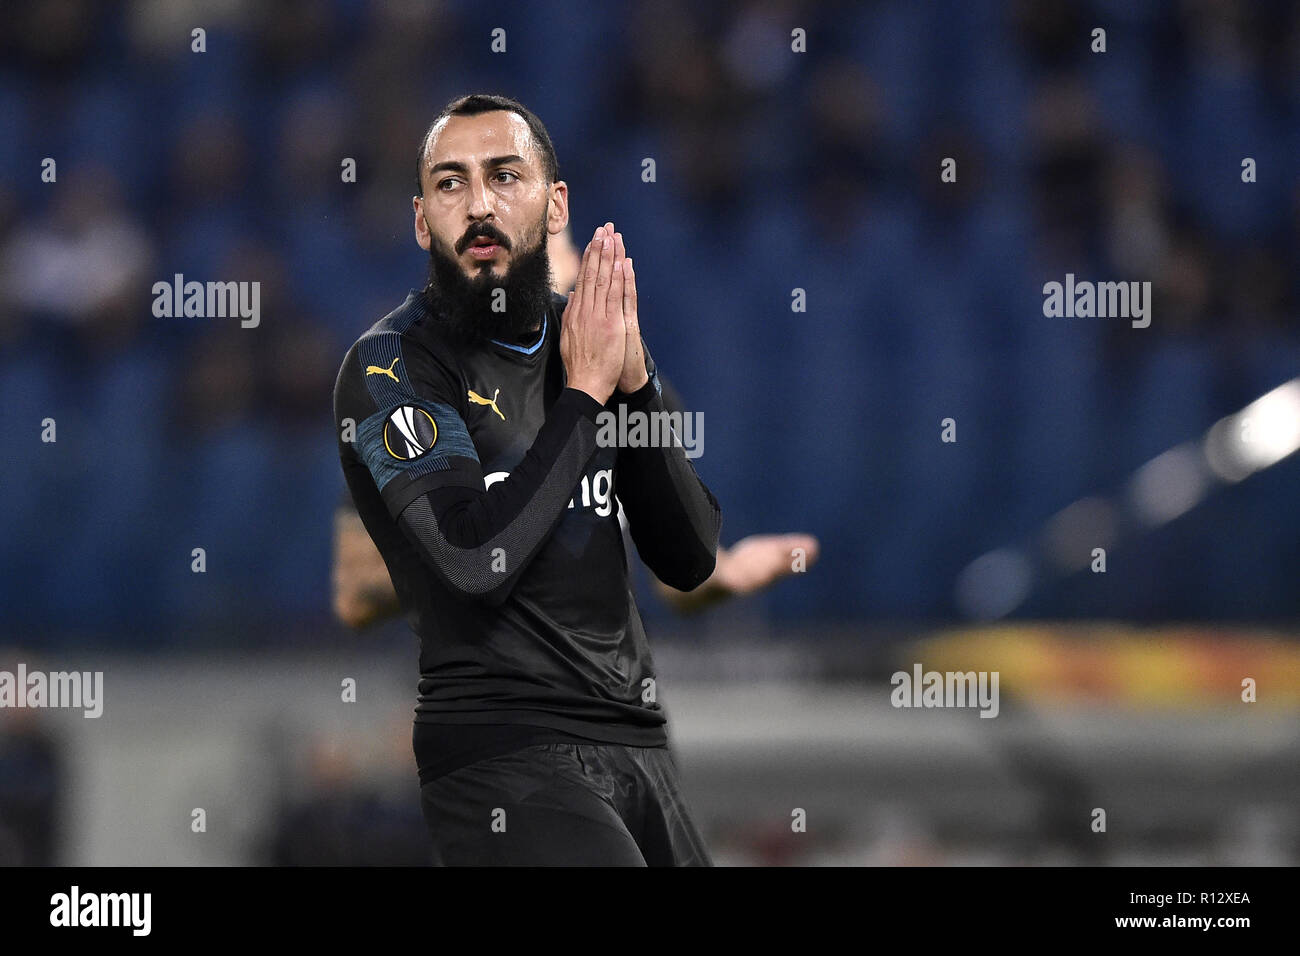 Rome, Italy. 8th November, 2018. Kostas Mitroglou of Olimpique de Marseille looks dejected during the UEFA Europa League Group Stage match between Lazio and Olympique de Marseille at Stadio Olimpico, Rome, Italy on 8 November 2018. Photo by Giuseppe Maffia. Credit: UK Sports Pics Ltd/Alamy Live News Stock Photo